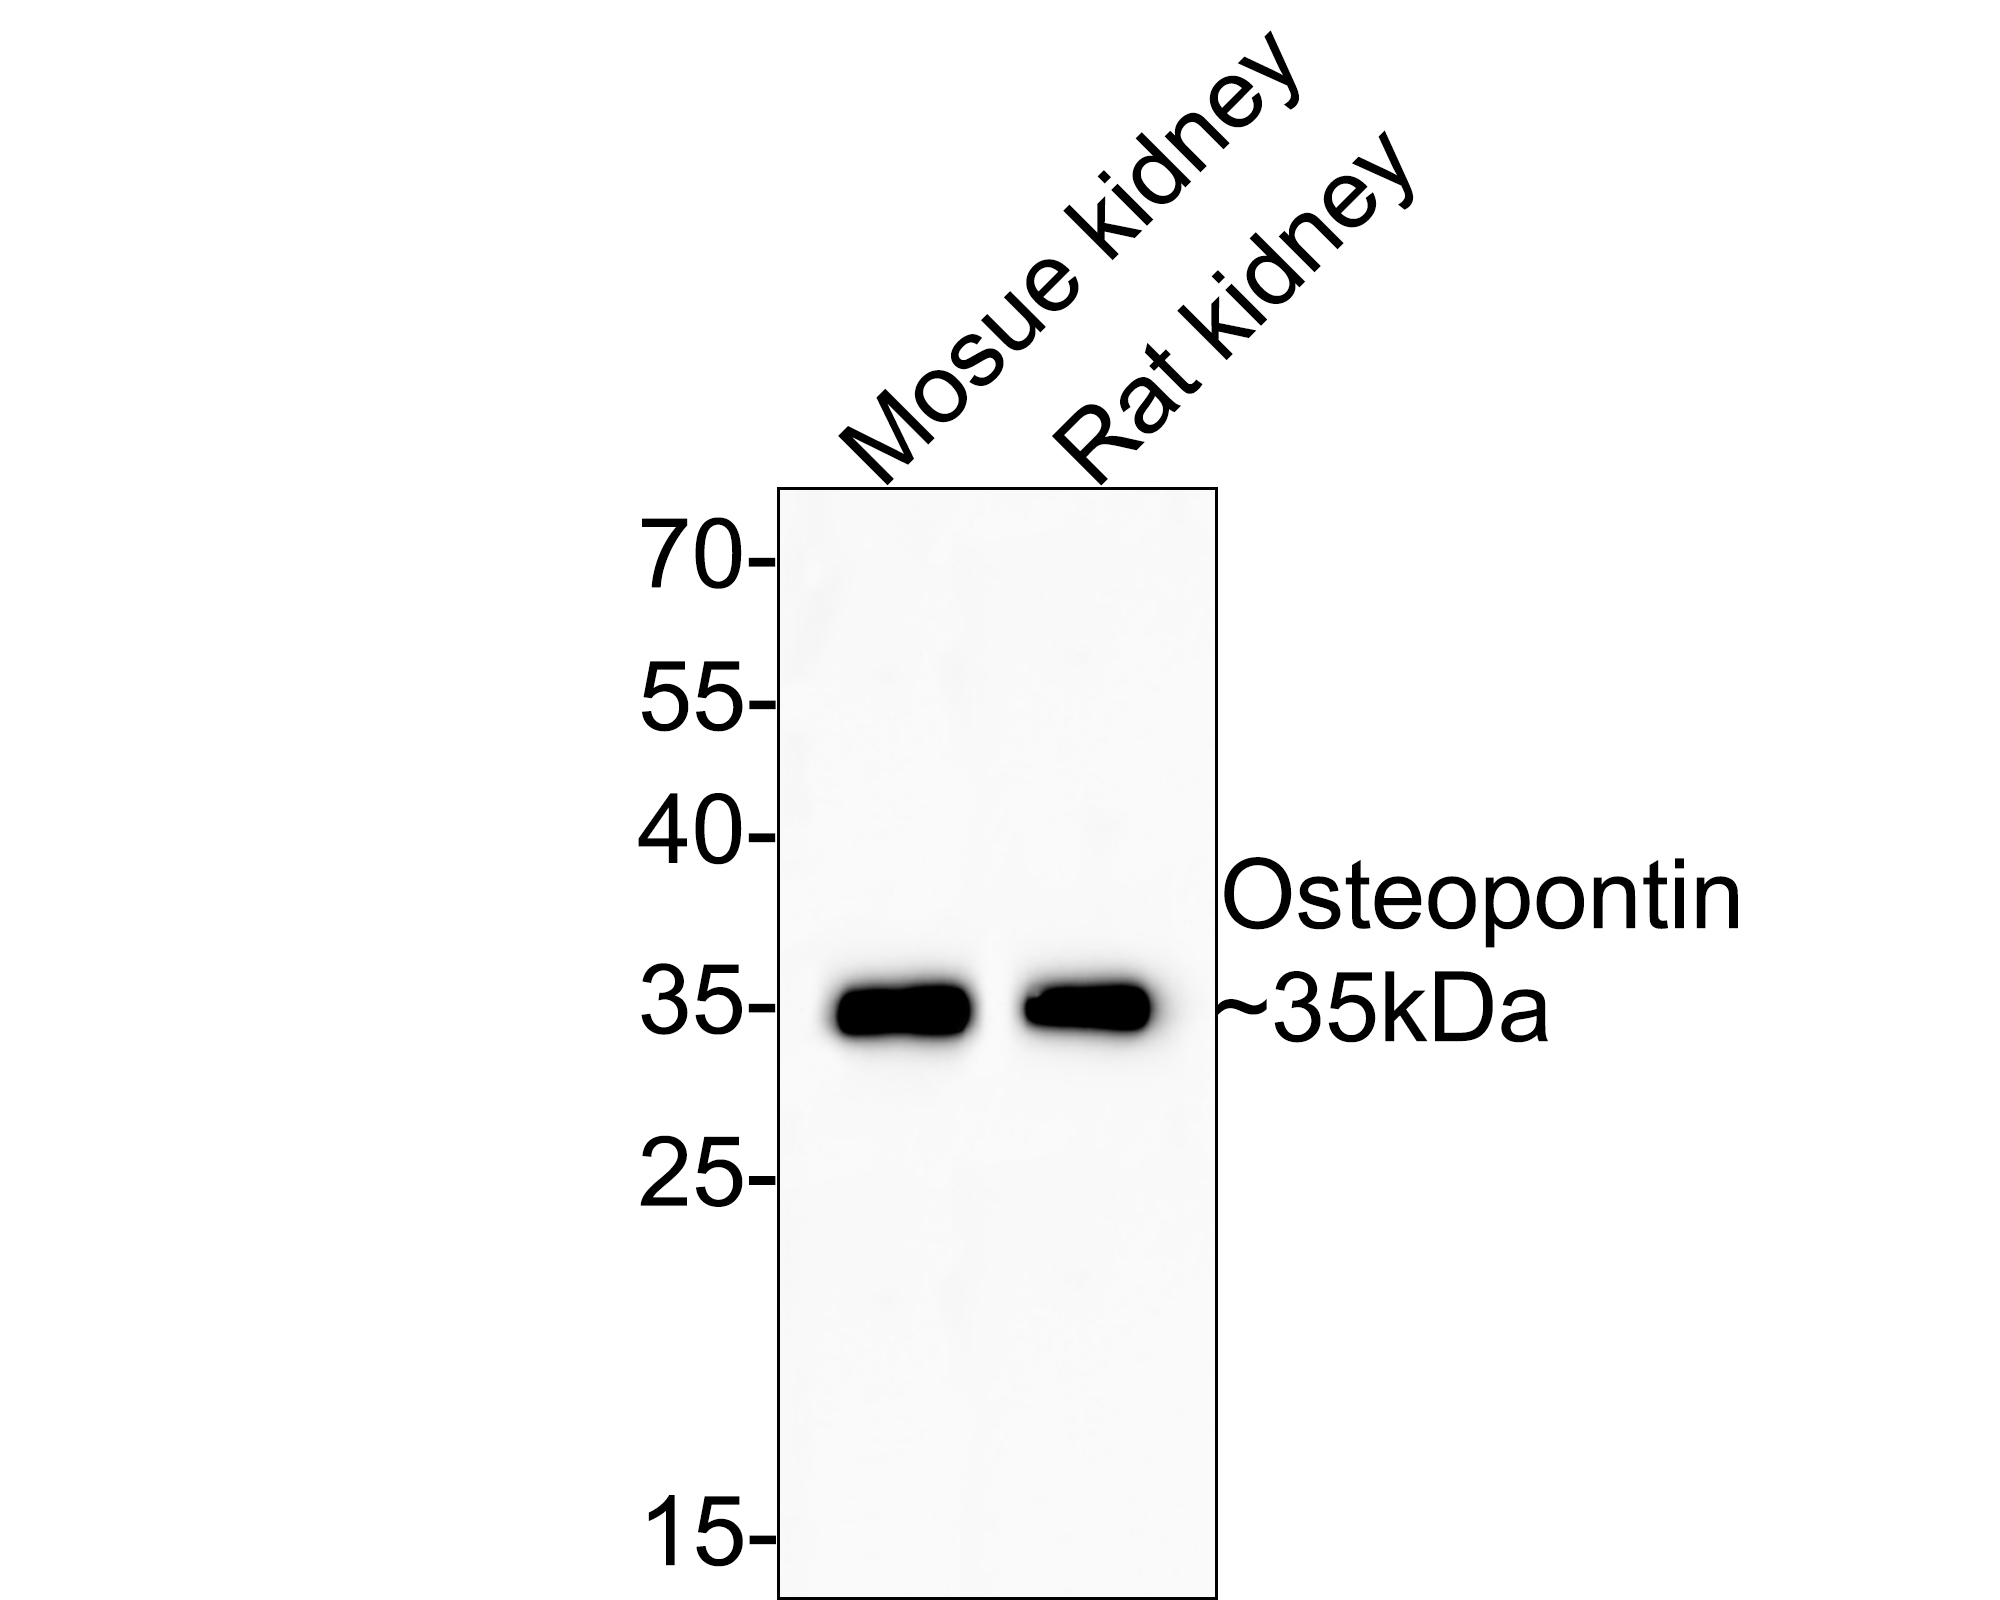 Western blot analysis of Osteopontin on different lysates. Proteins were transferred to a PVDF membrane and blocked with 5% BSA in PBS for 1 hour at room temperature. The primary antibody (0806-6, 1/2000) was used in 5% BSA at room temperature for 2 hours. Goat Anti-Rabbit IgG - HRP Secondary Antibody (HA1001) at 1:5,000 dilution was used for 1 hour at room temperature.<br />
Positive control: <br />
Lane 1: Rat kidney tissue lysate<br />
Lane 2: Mouse kidney tissue lysate<br />
Lane 3: HepG2 cell lysate